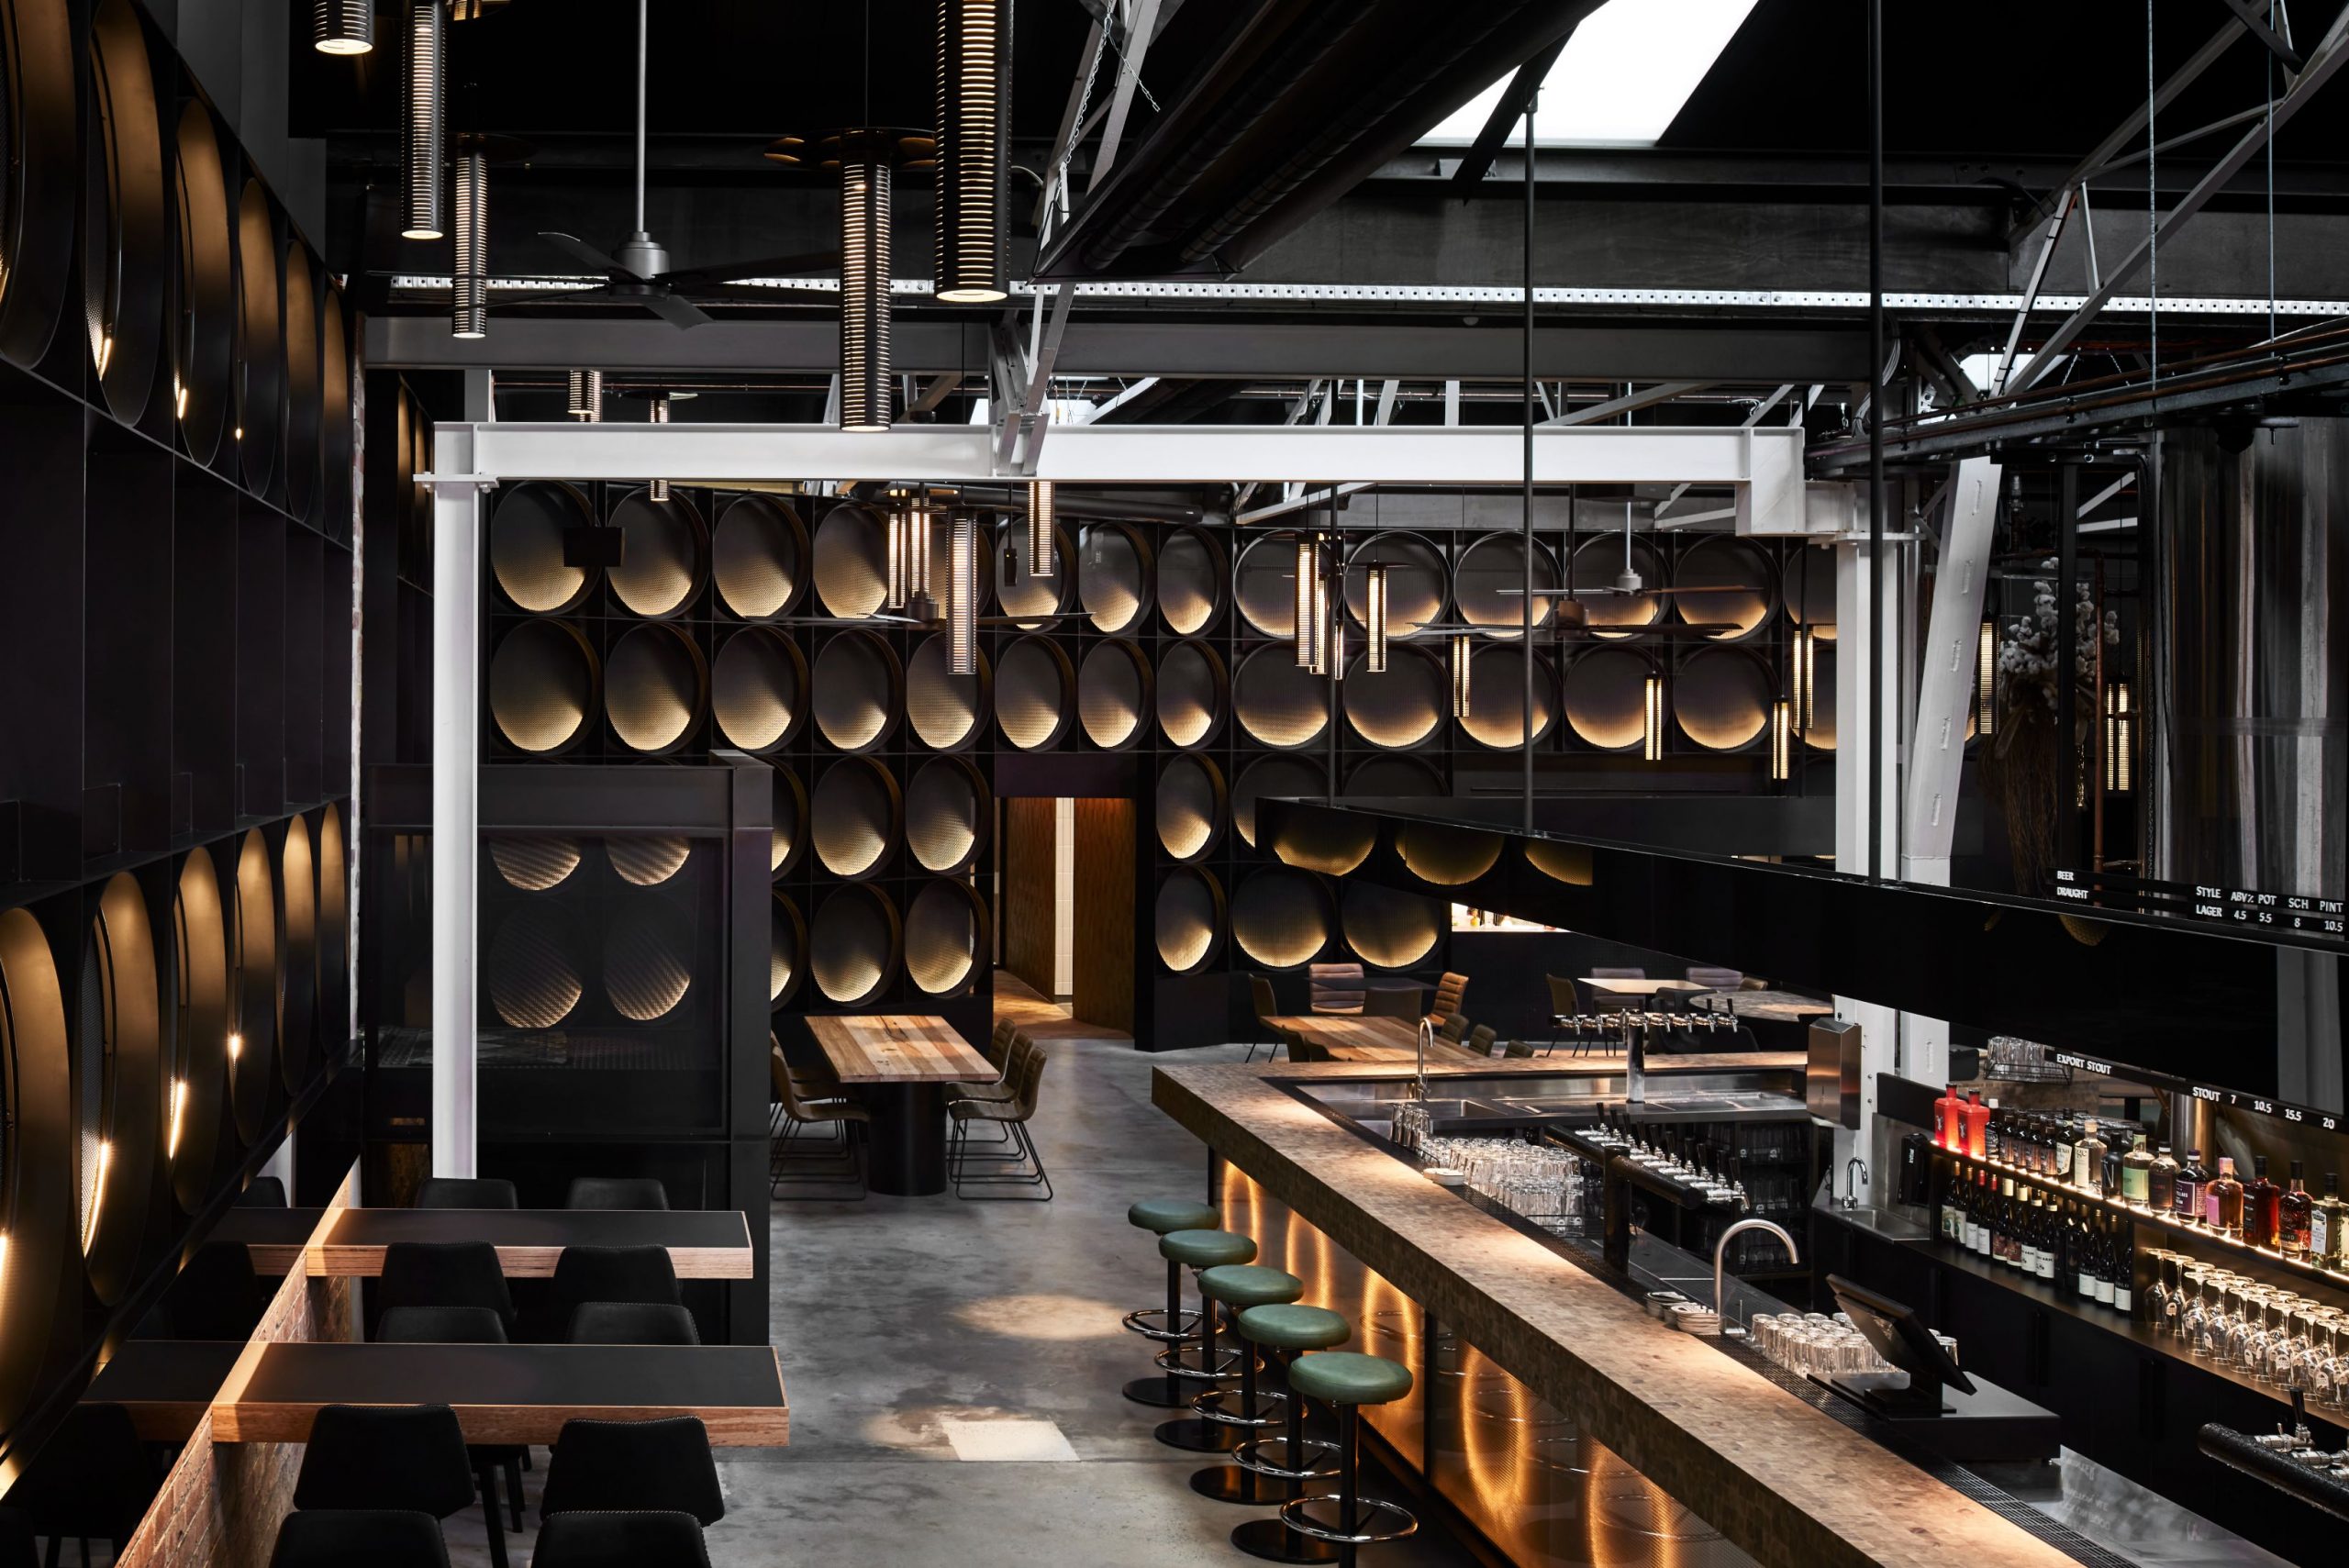 04_Deeds Brewery and Taproom_SplinterSocietyArchitecture_SharynCairns